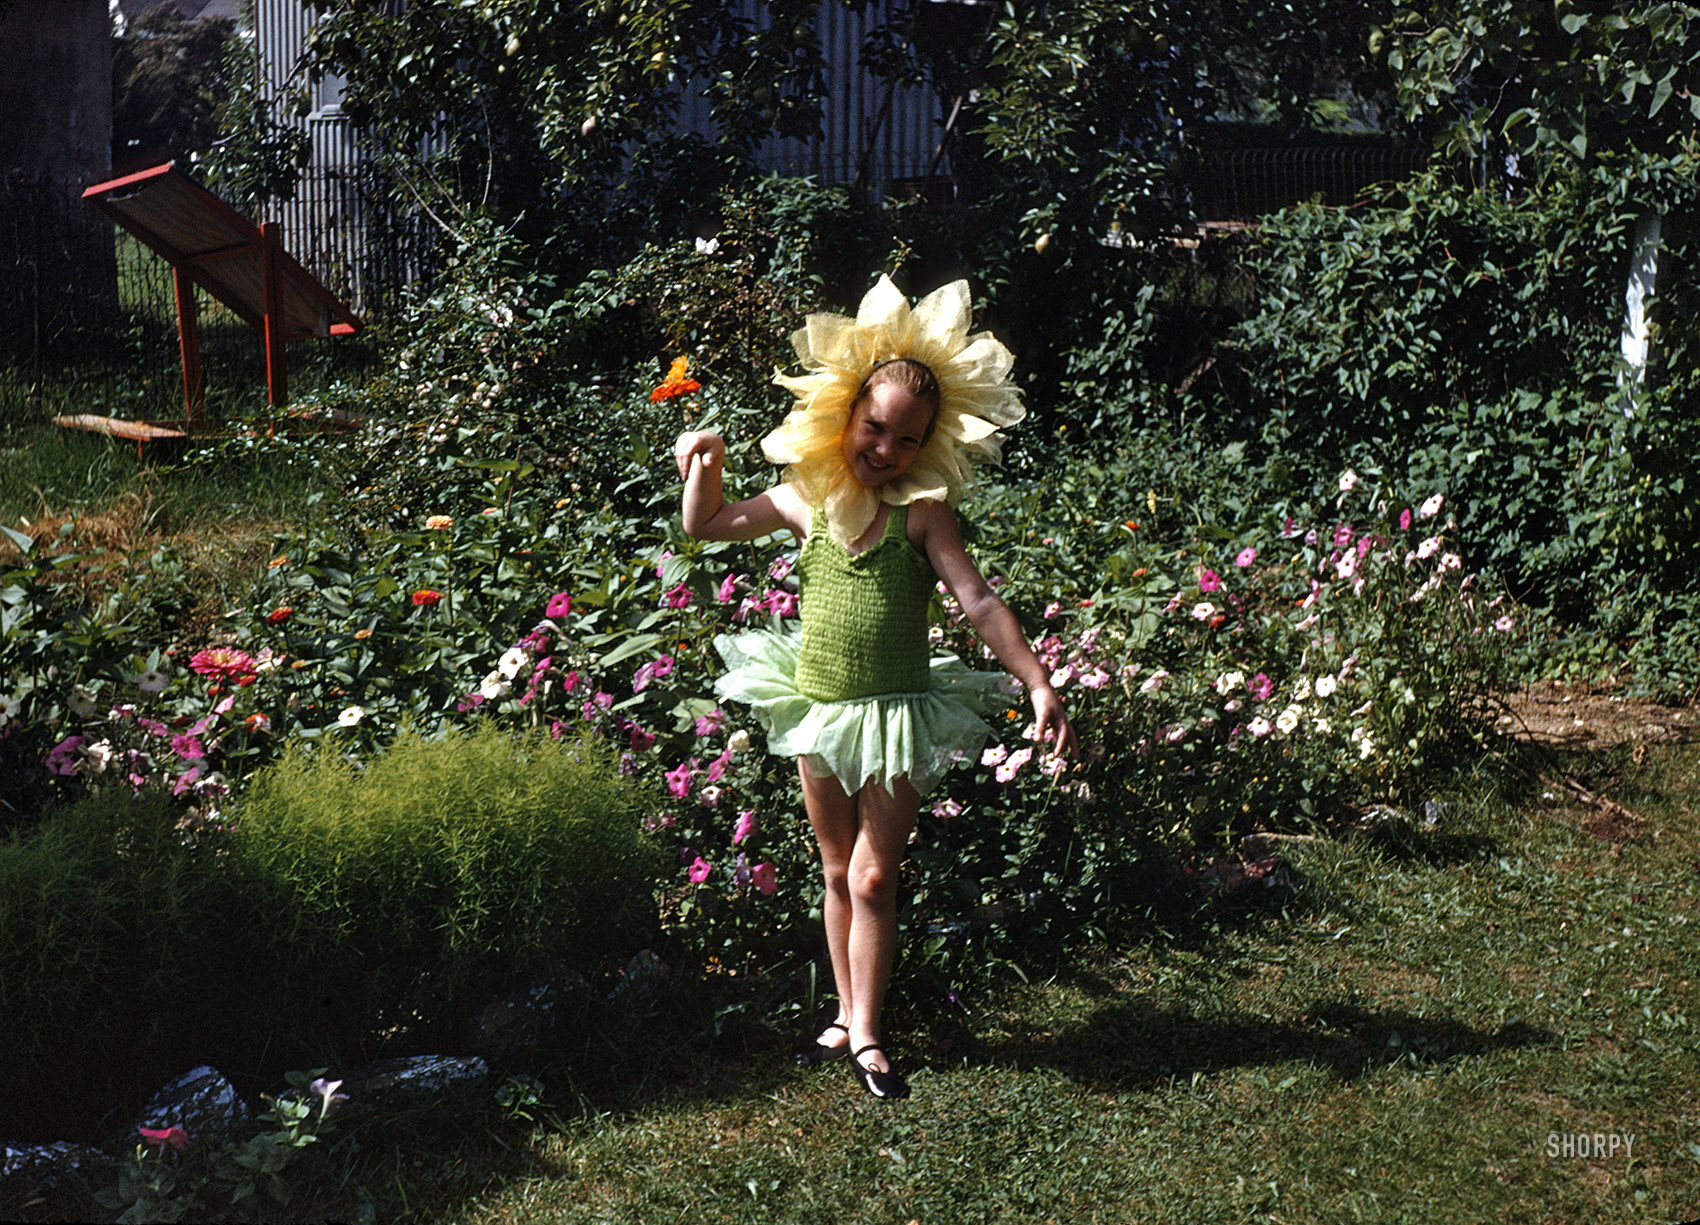 June 1955. "Ballerina Janet." I sense a school play or dance recital coming up. Our first look at yet another batch of color slides found on eBay. View full size.